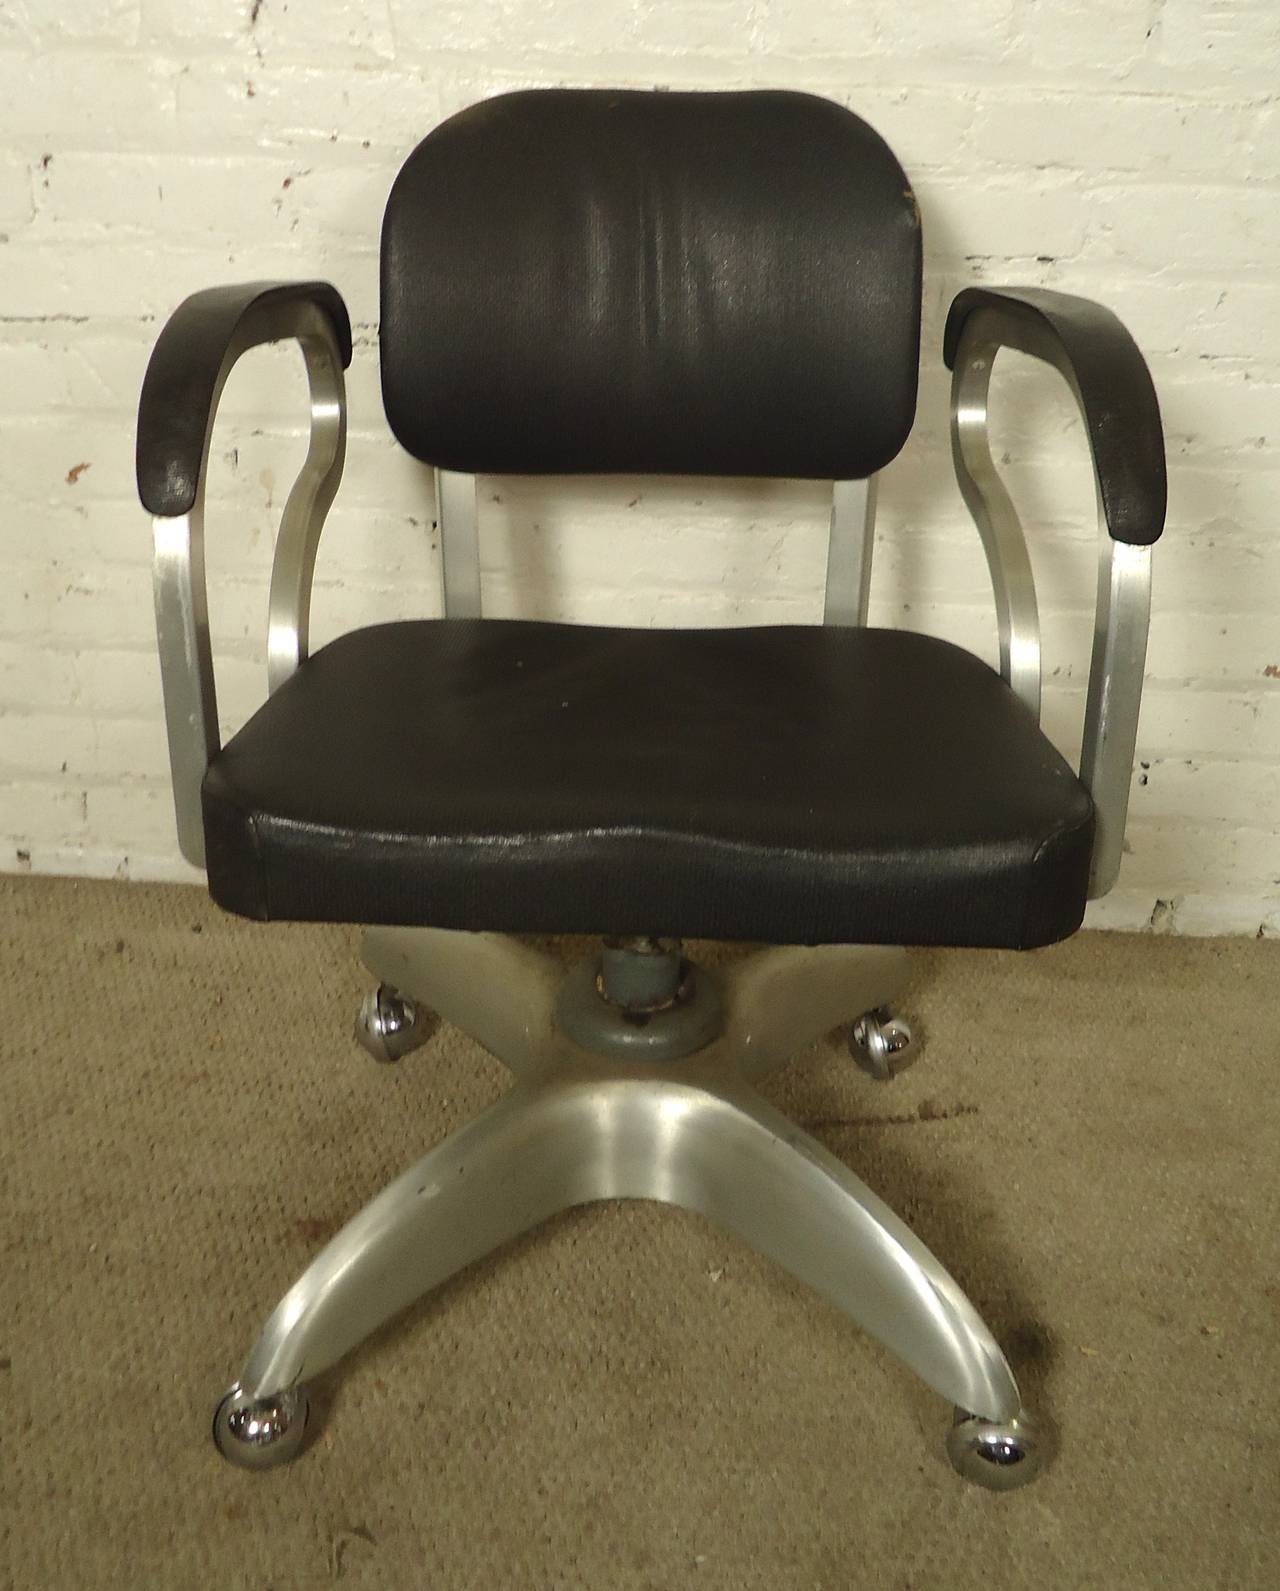 Vintage-modern desk chair featuring exaggerated arm rests, aluminum frame and wheeled swivel base, designed by Good Form. 

(Please confirm item location - NY or NJ - with dealer)